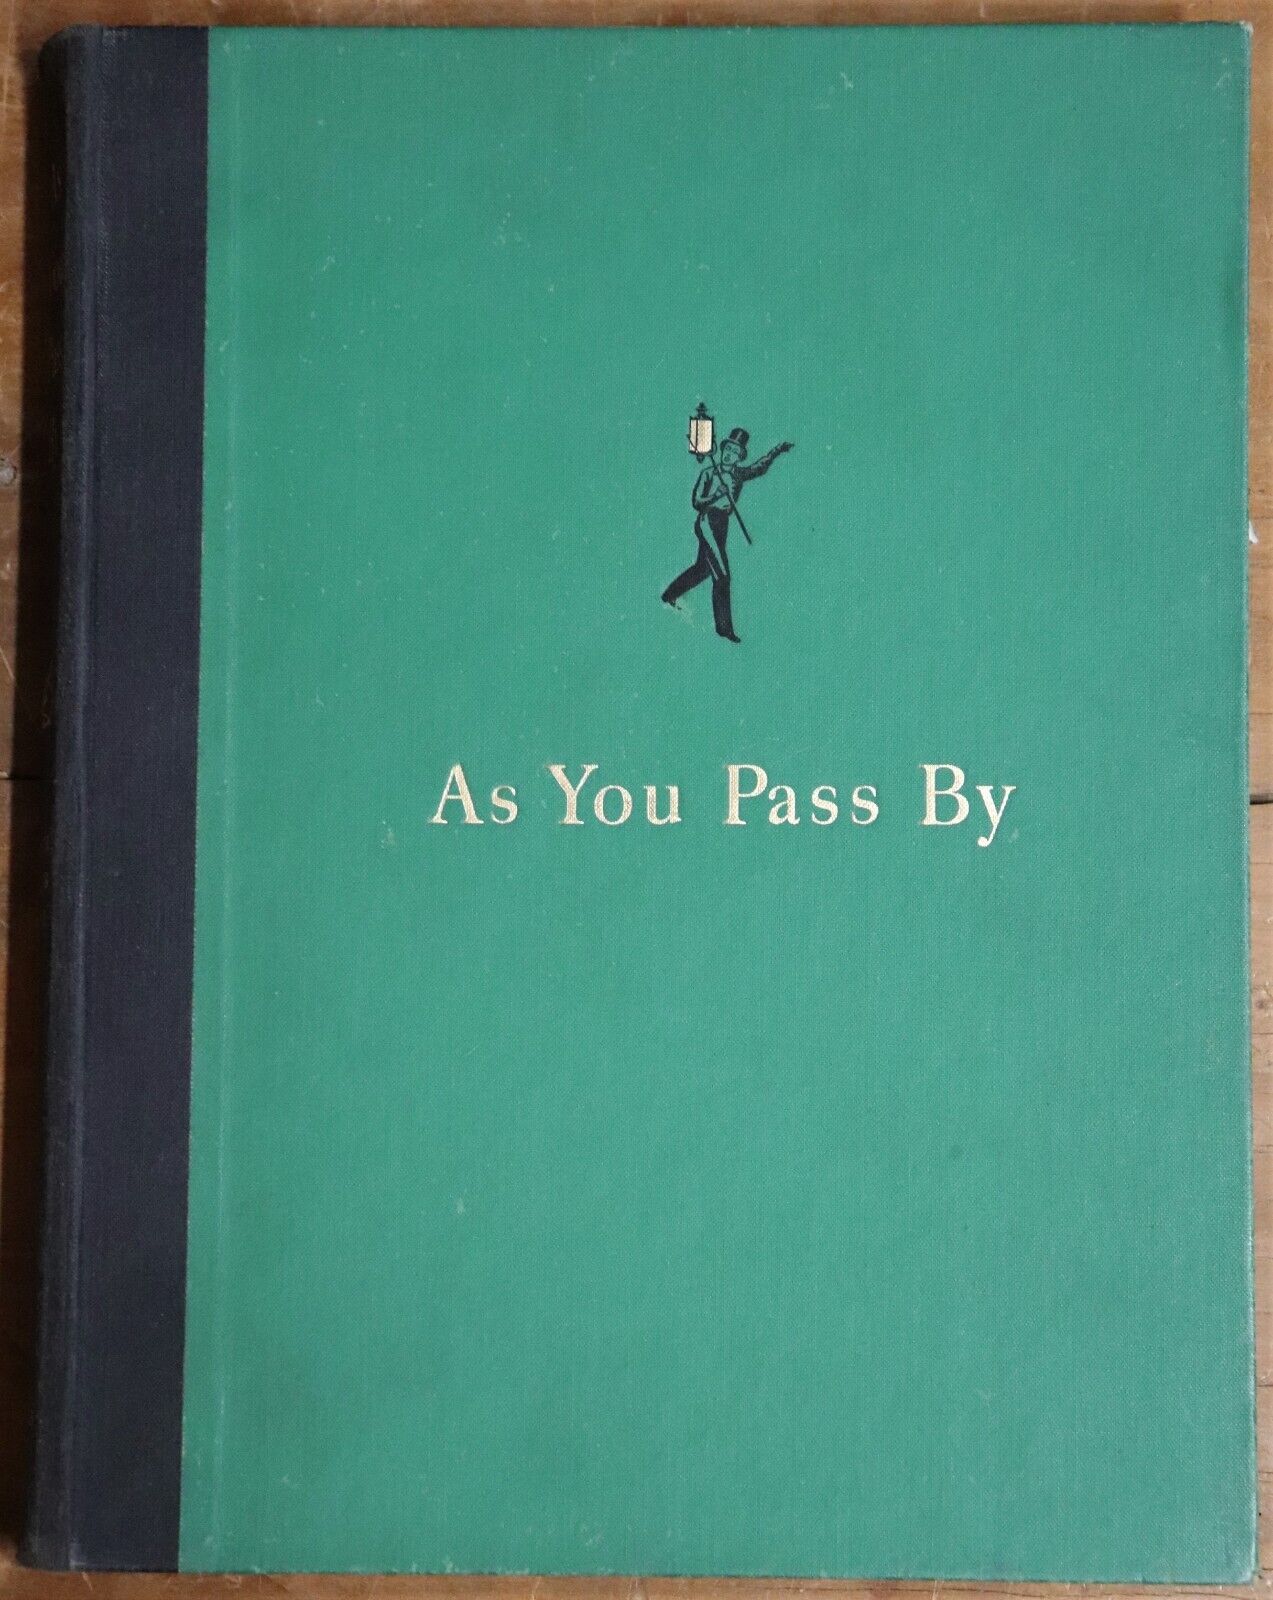 As You Pass By - 1952 - 1st Edition American History Book